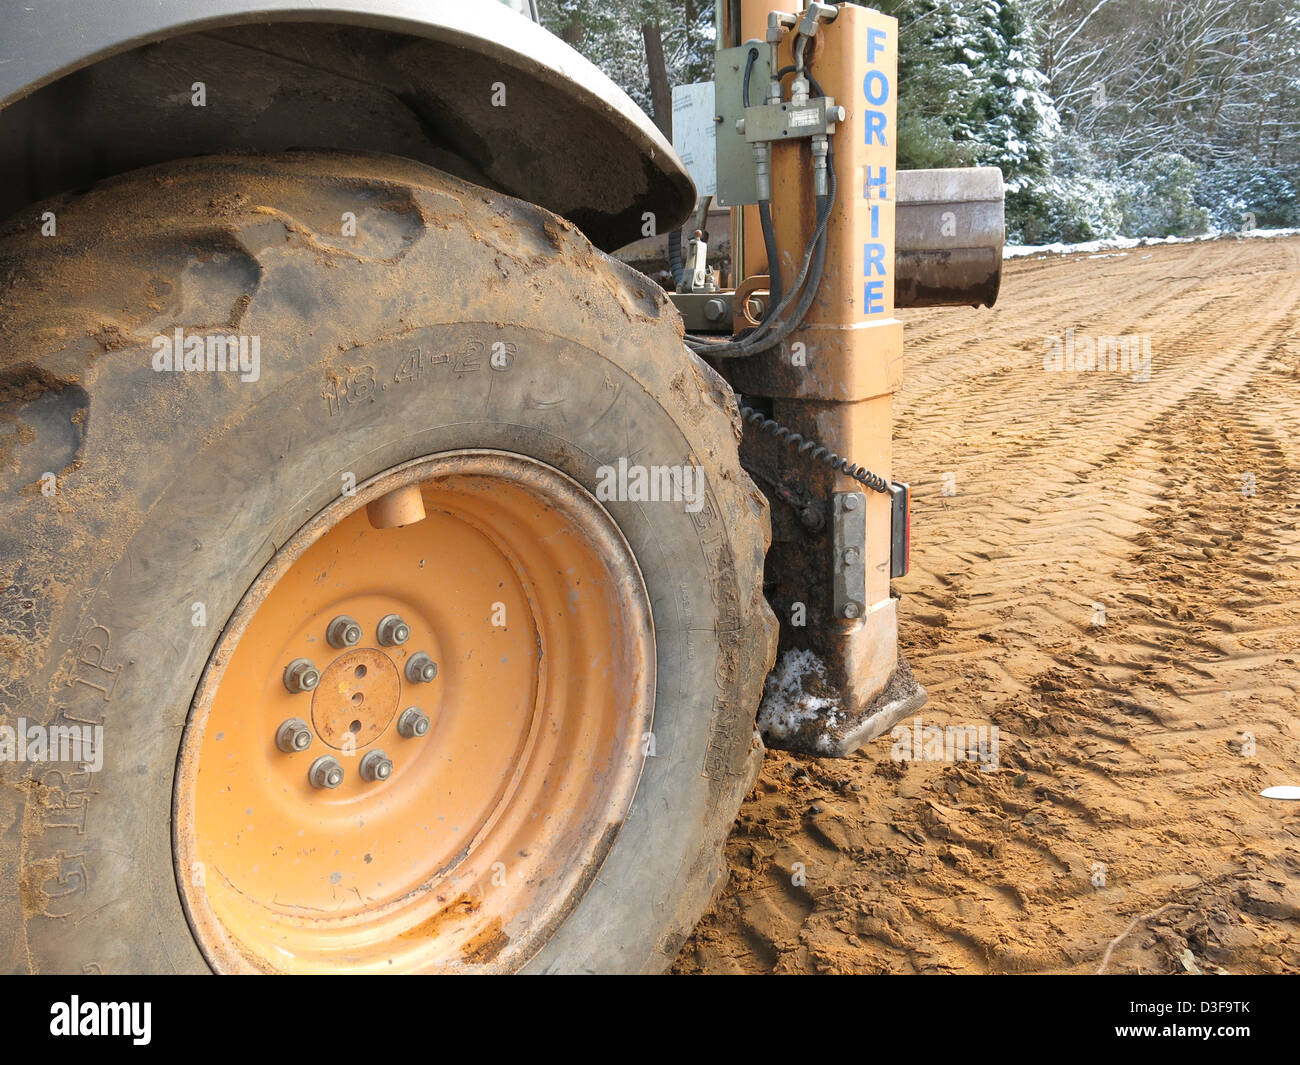 Heavy Plant Digger For Hire Jan 2013 Stock Photo